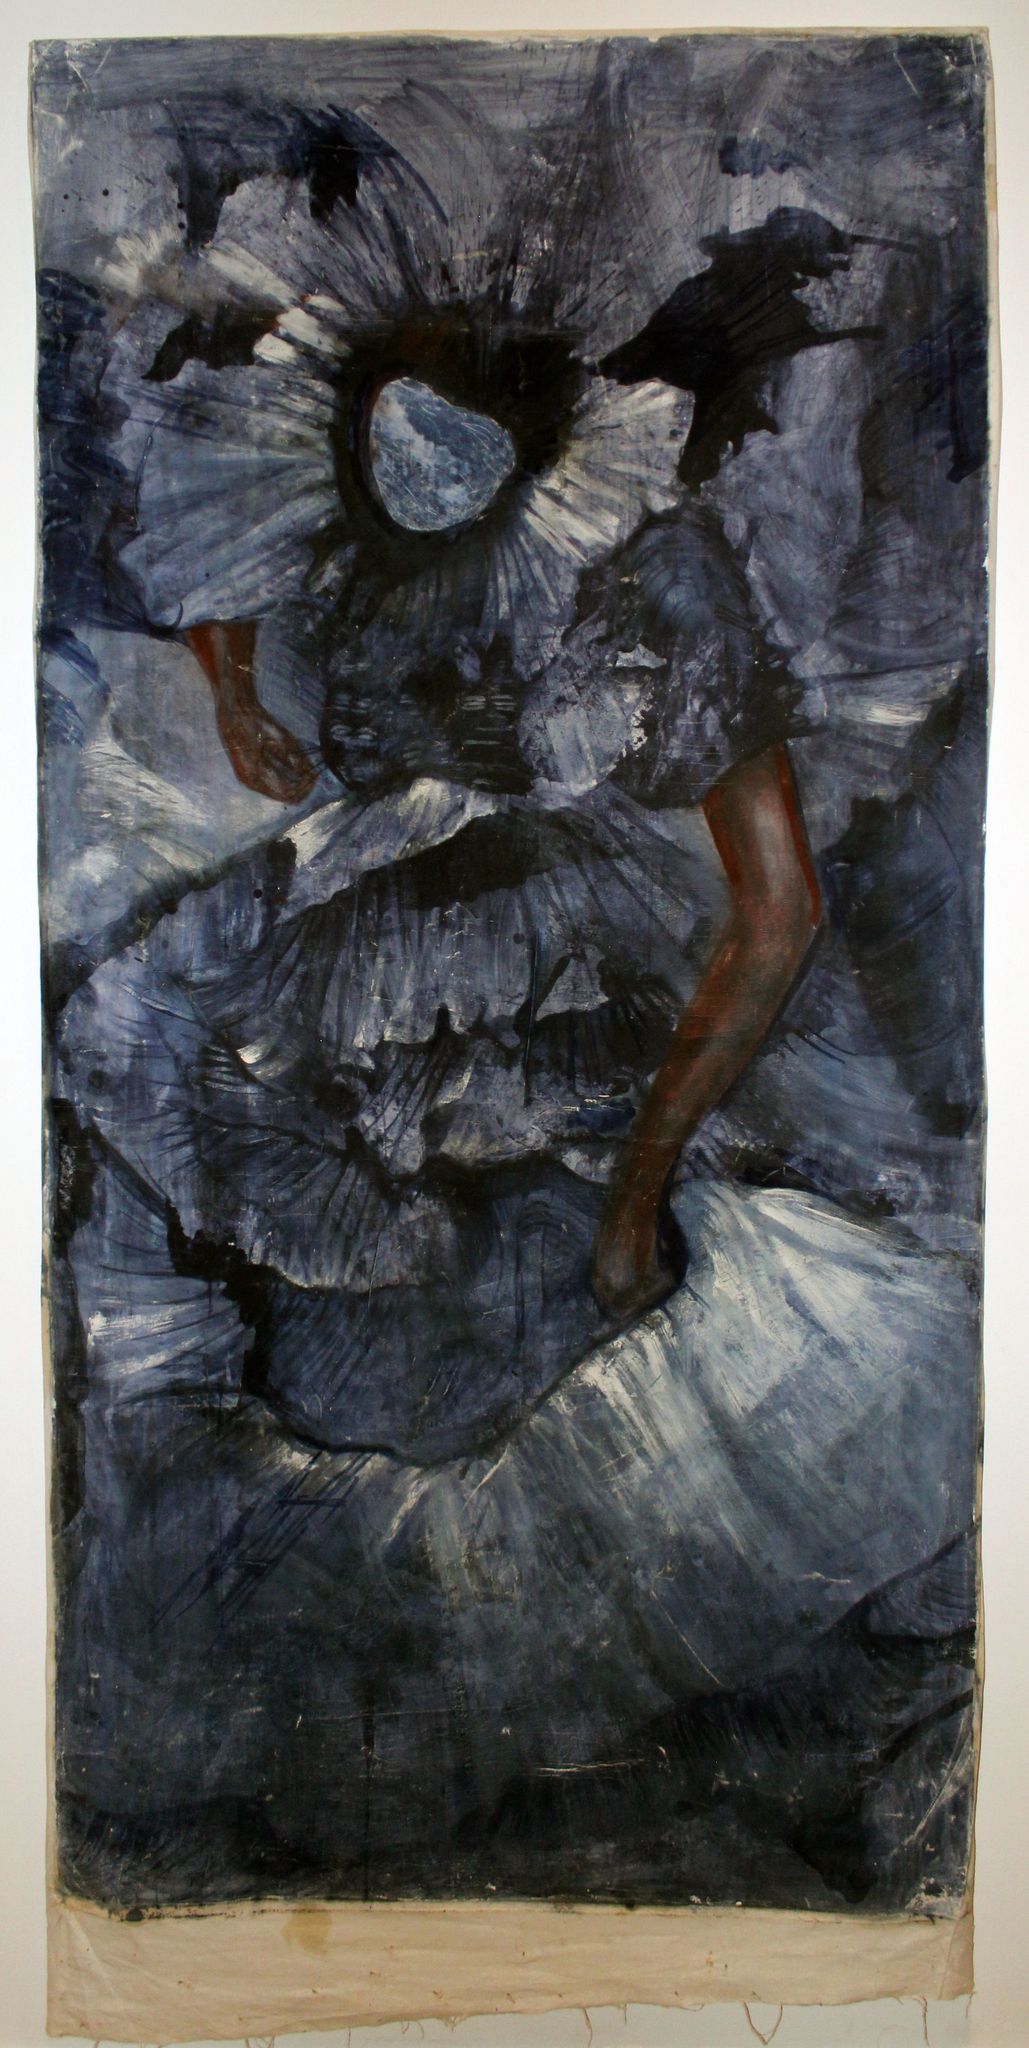 Unstretched canvas with an abstracted figure in a blue dress with black arms and black hair.